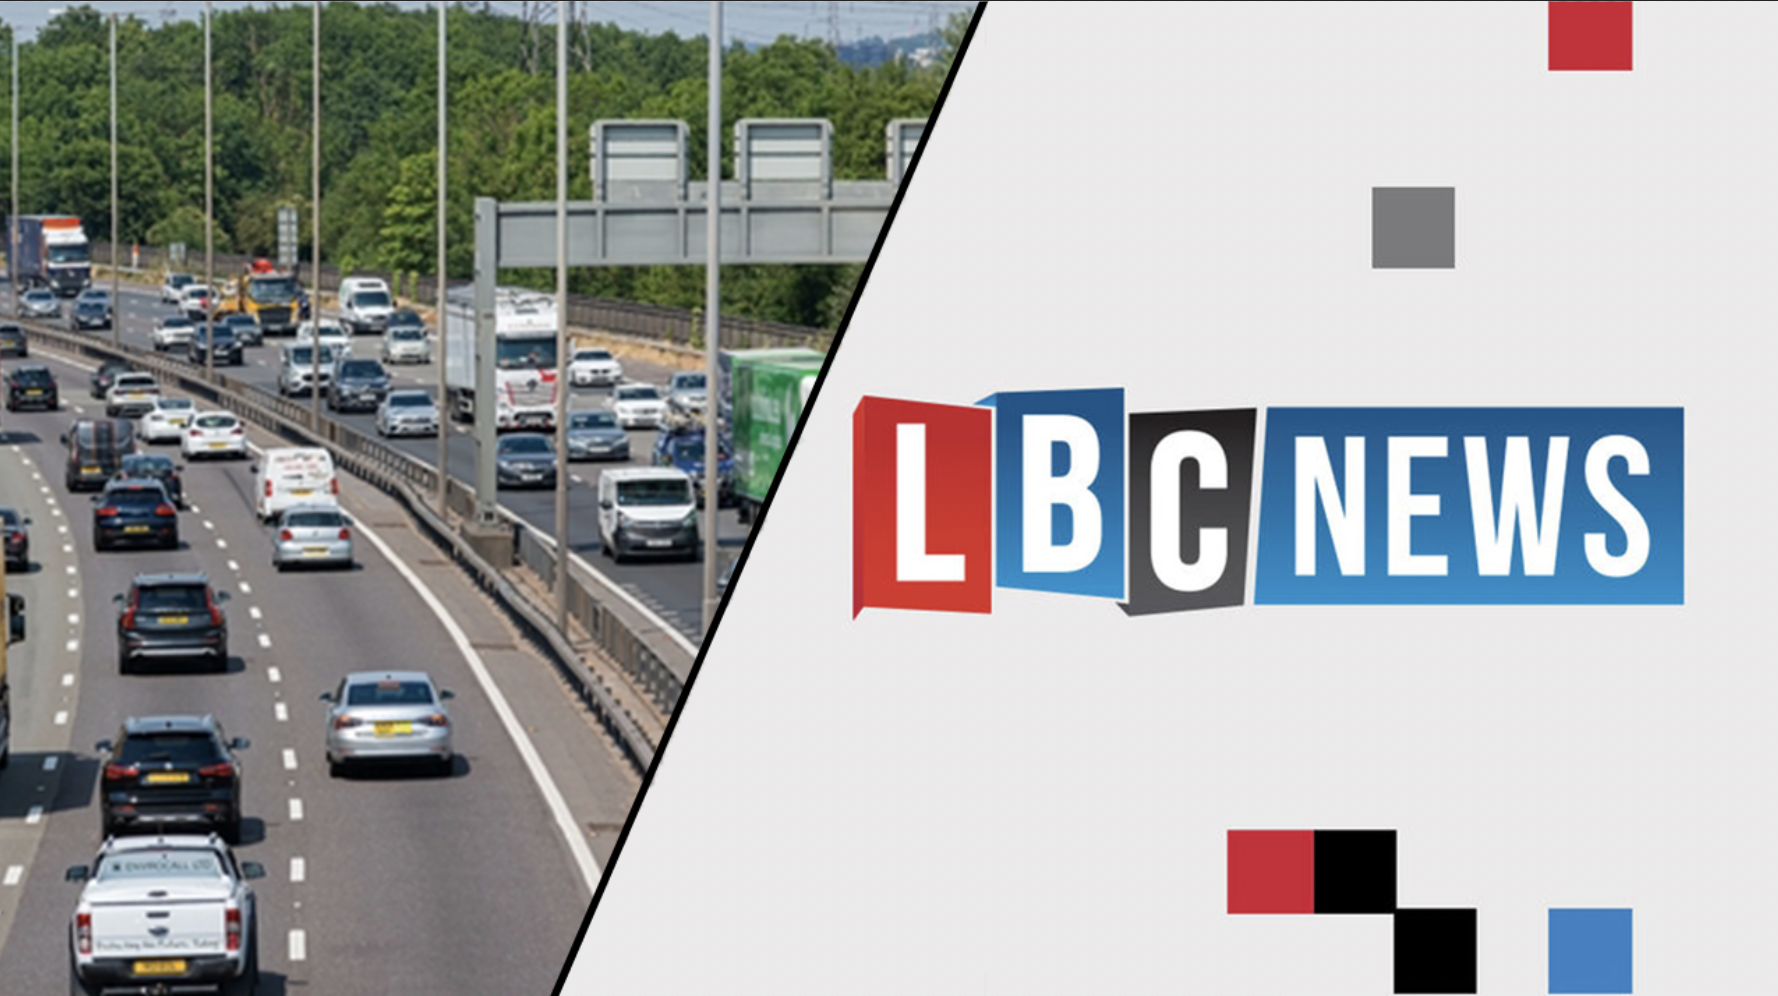 Govt “Can go a lot further” in road investment – RHA to LBC News